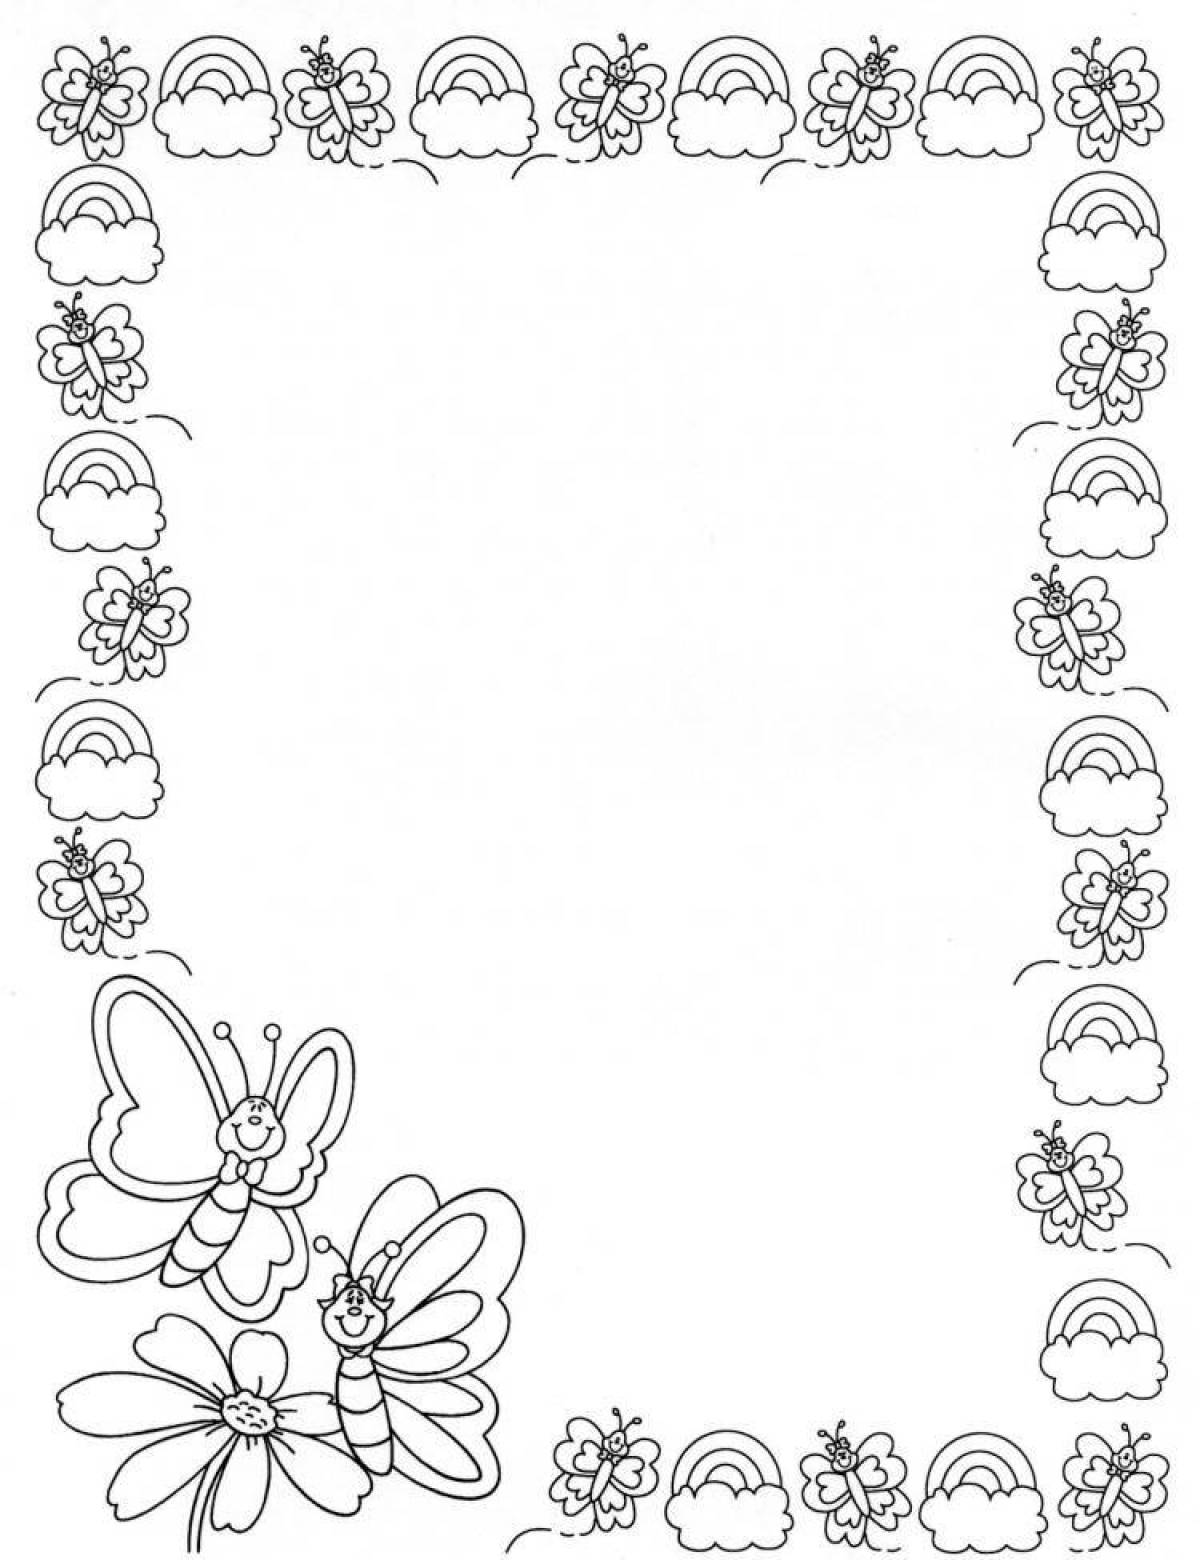 Dreamy coloring page frame